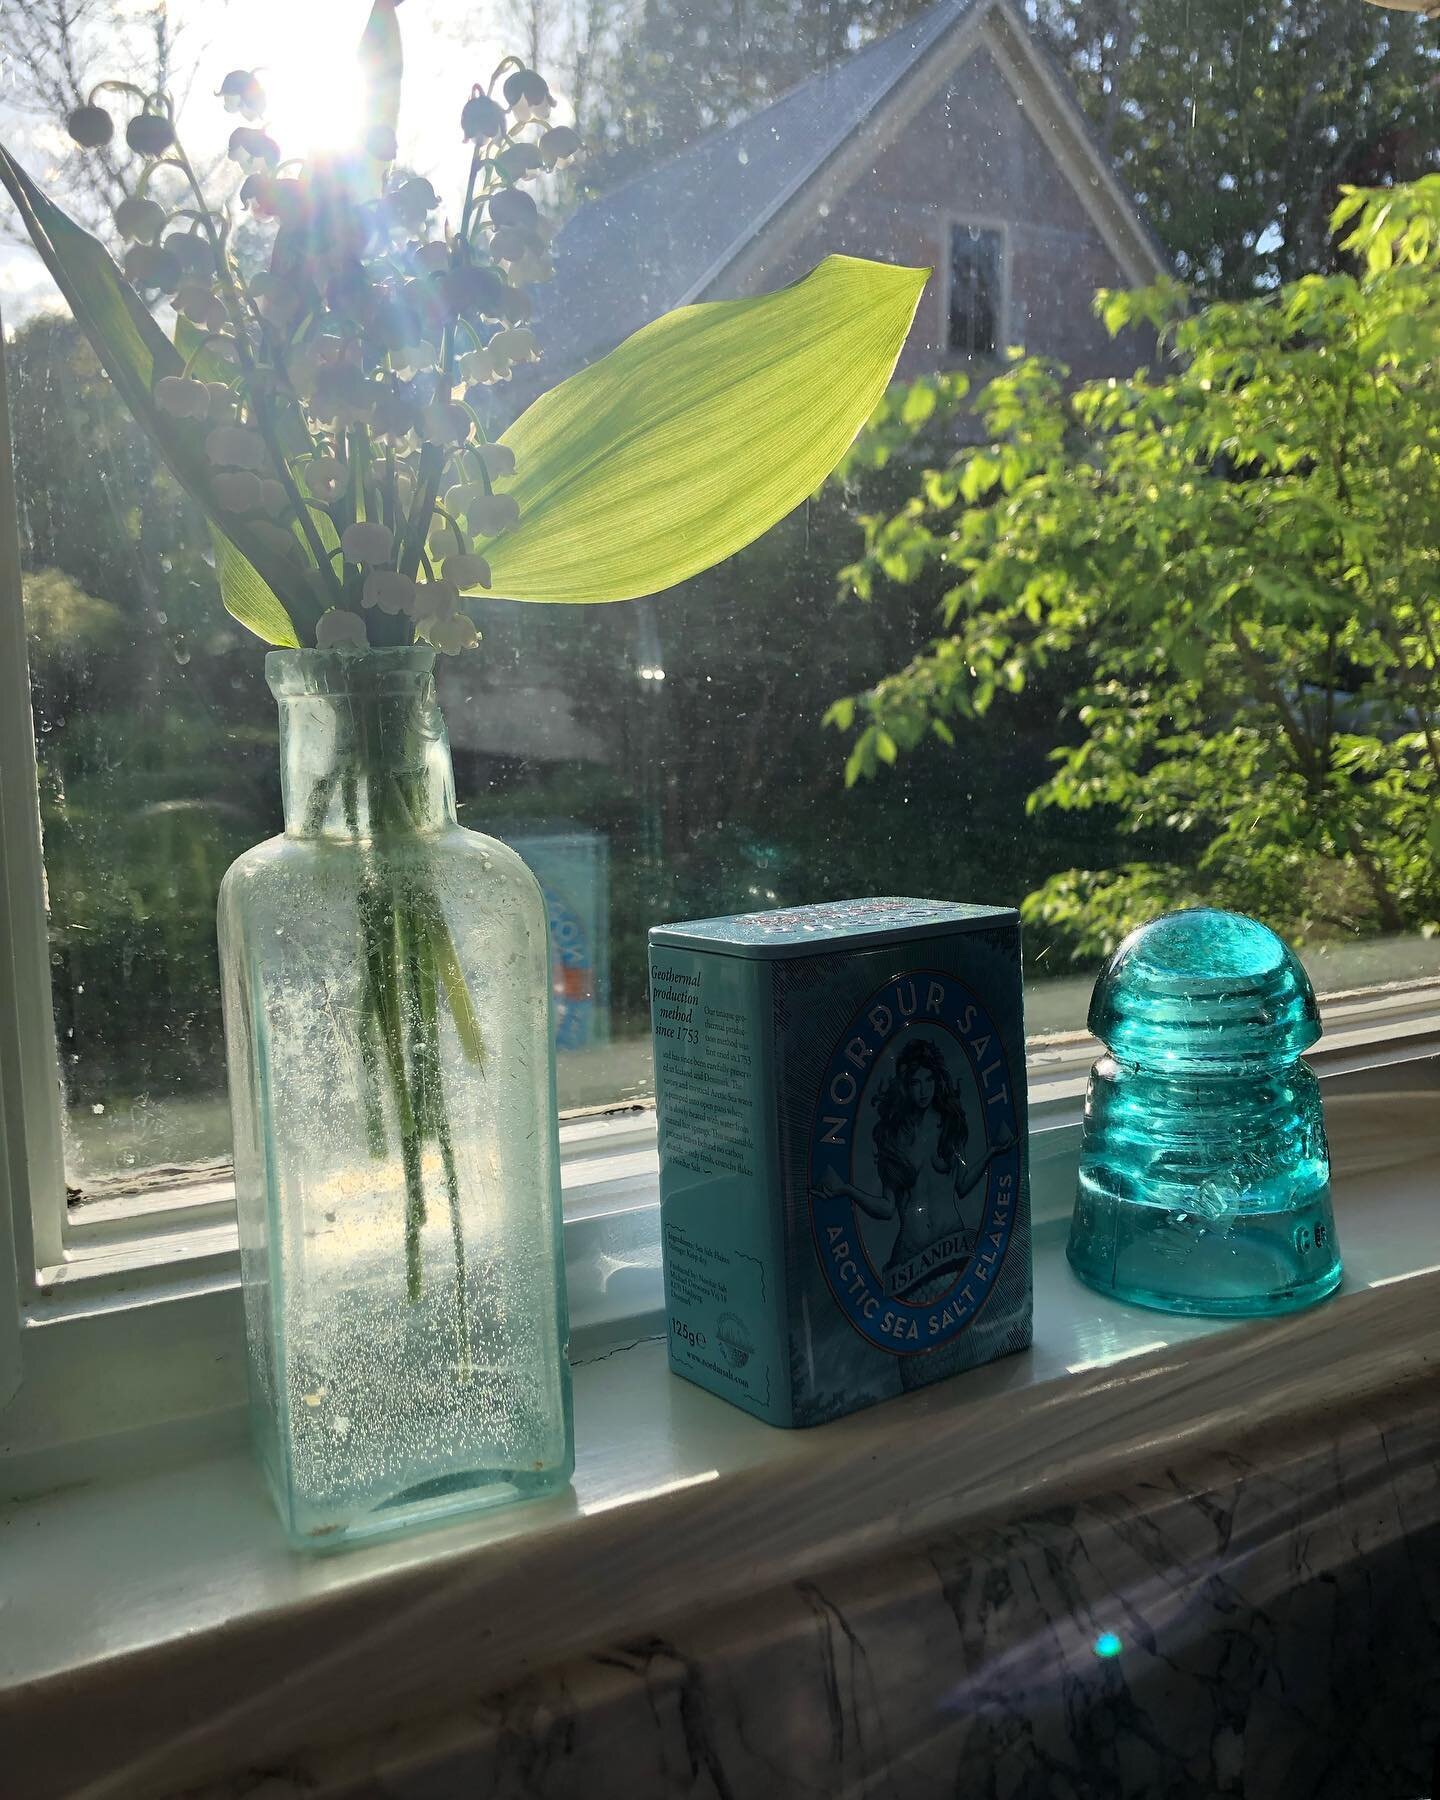 Lily of the Valley my favorite scent of Spring! Bottle and glass insulator found here at #260main❤️ 
Iceland sea salt #mothersday gift 💝